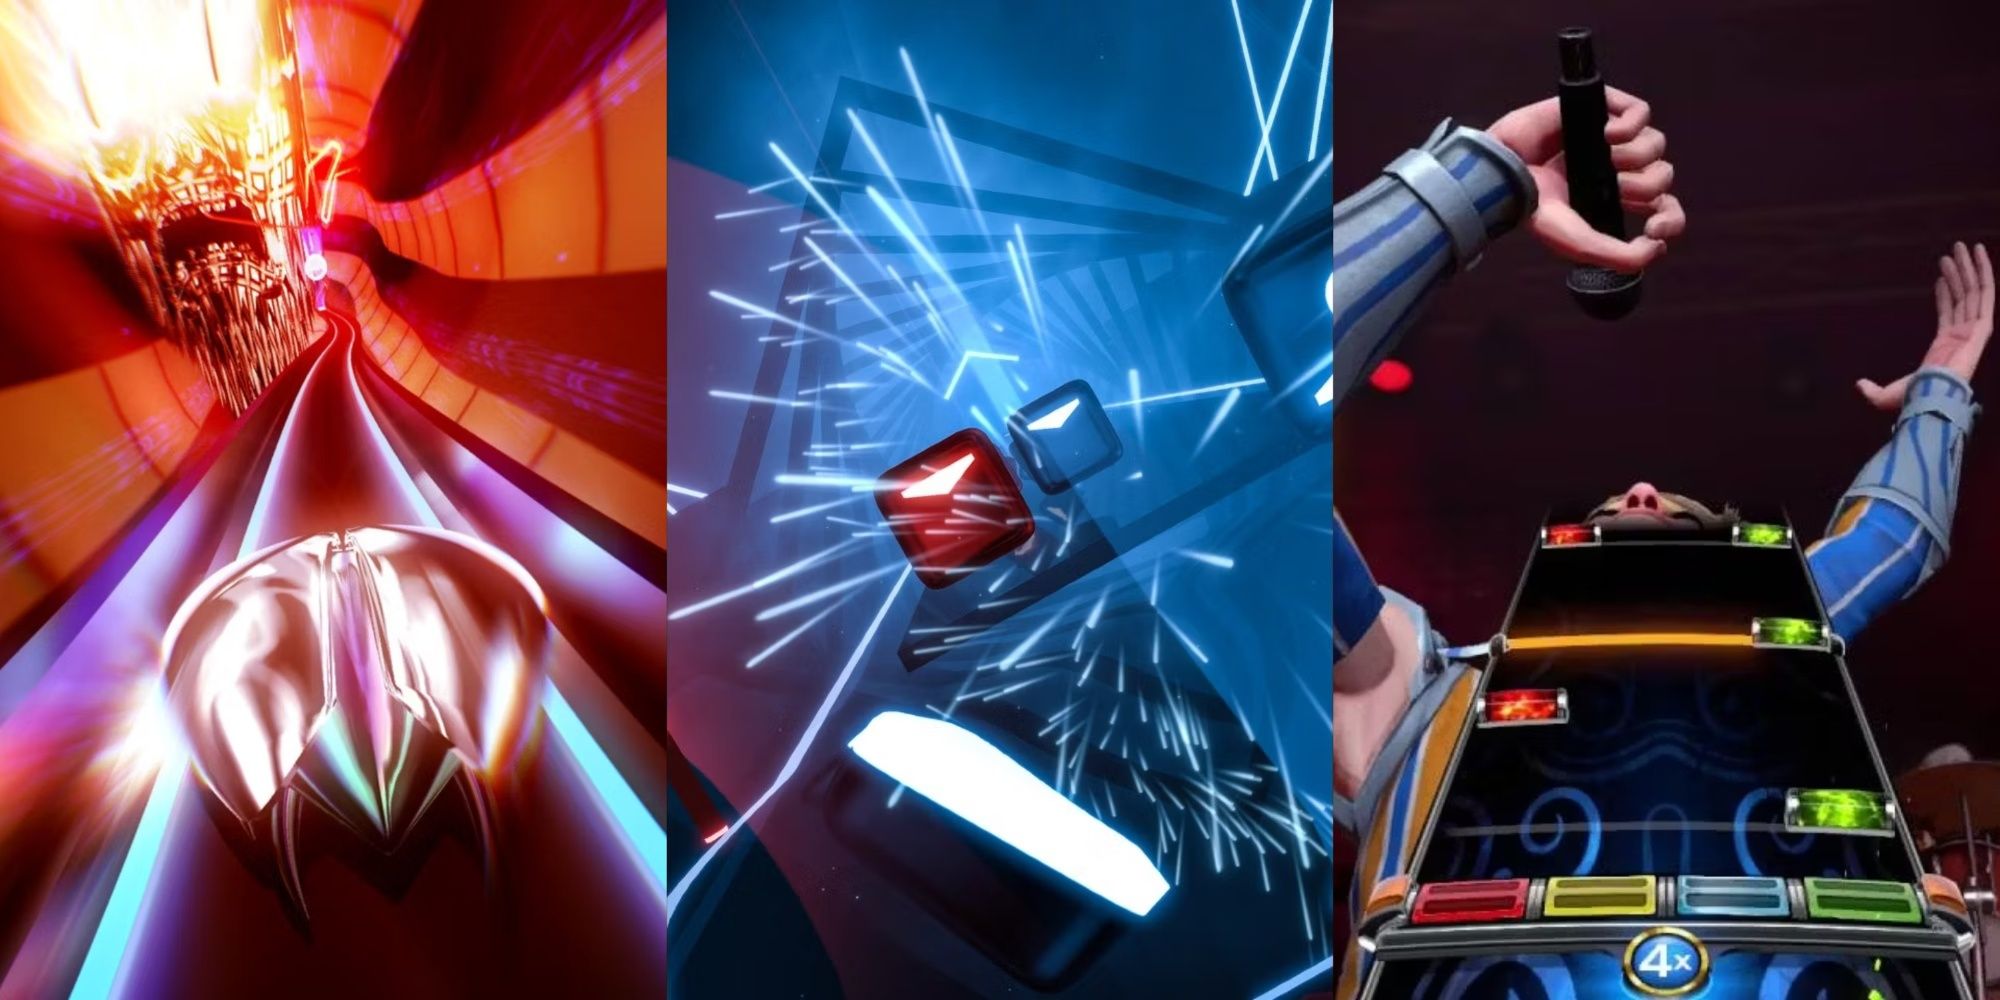 Collage image of Thumper, Beat Saber, and Rockband.